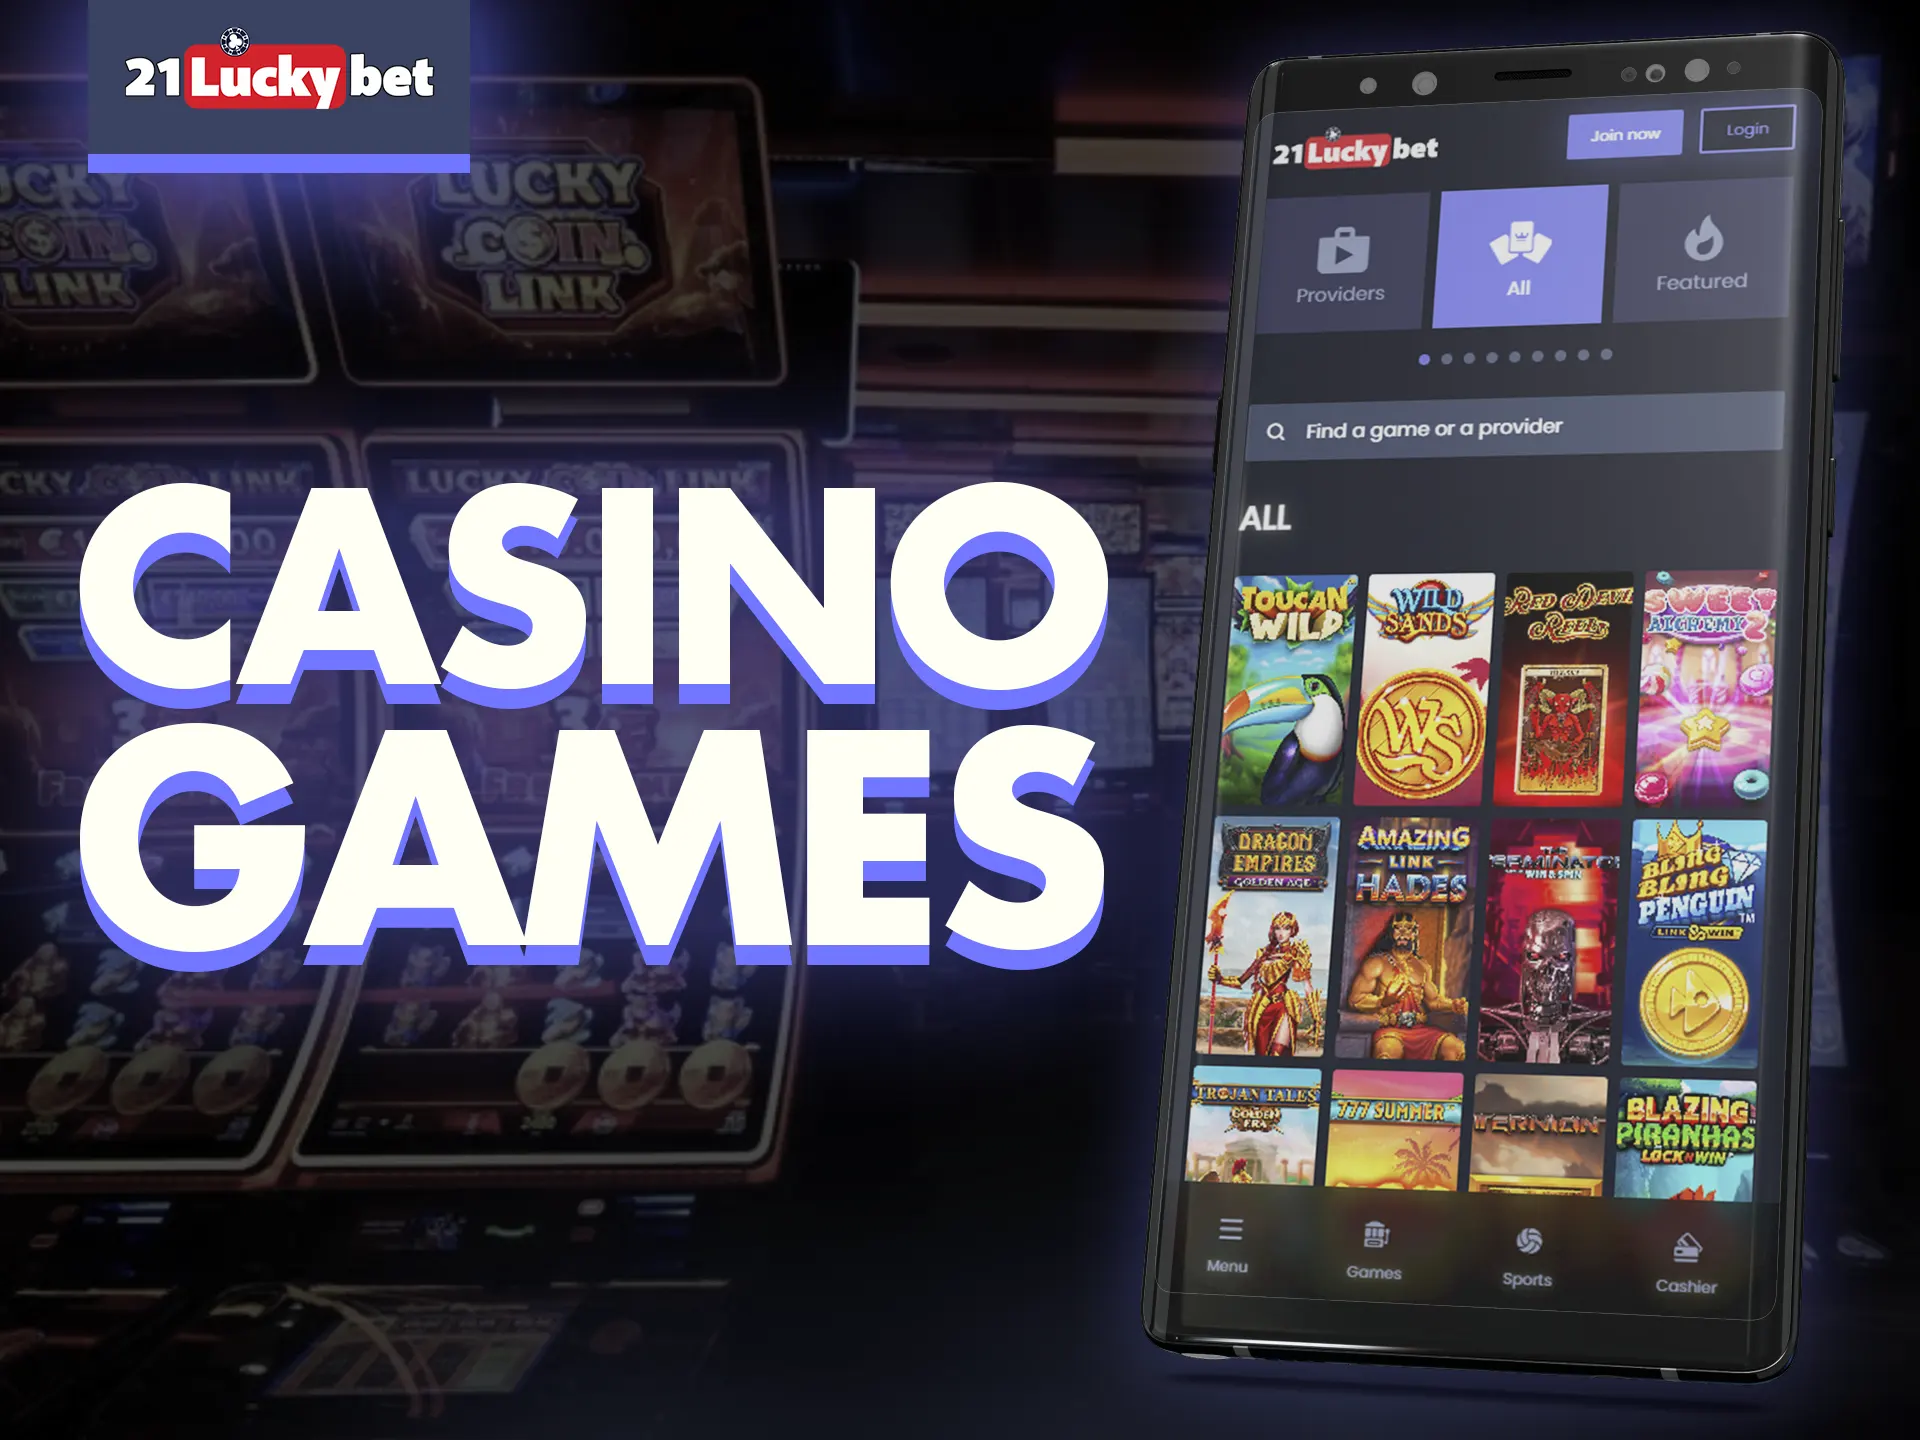 In 21luckybet app play many games in the casino section.